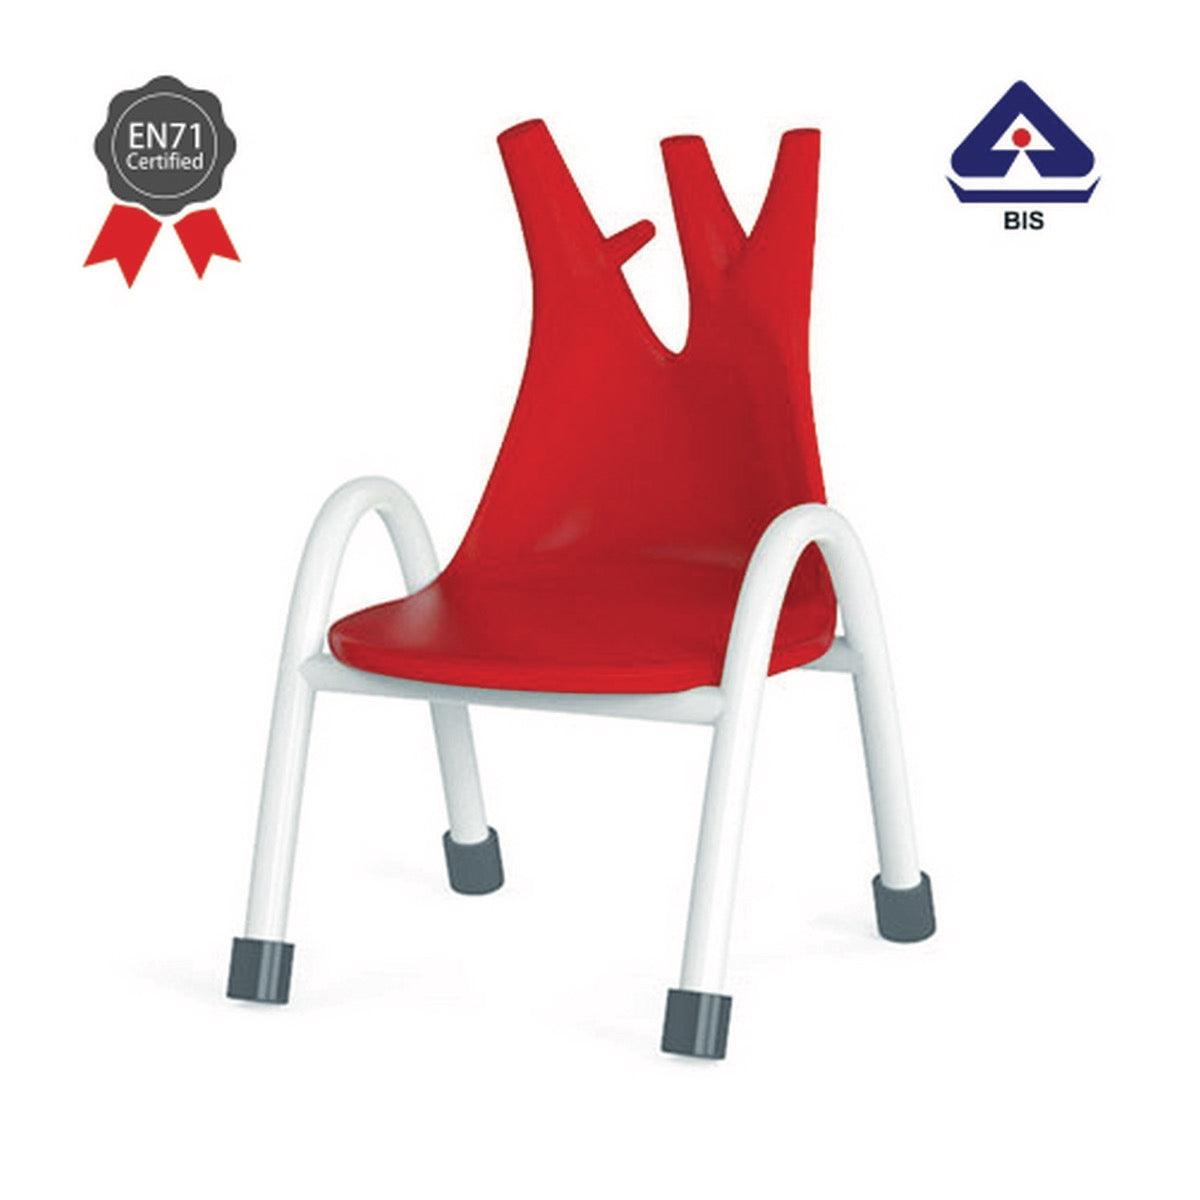 Ok Play Trunk Chair, Study Chair, Sturdy And Durable Chair, Plastic Chair, Perfect For Home, Creches And School, Red, 5 to 10 Years, Height 14 Inches